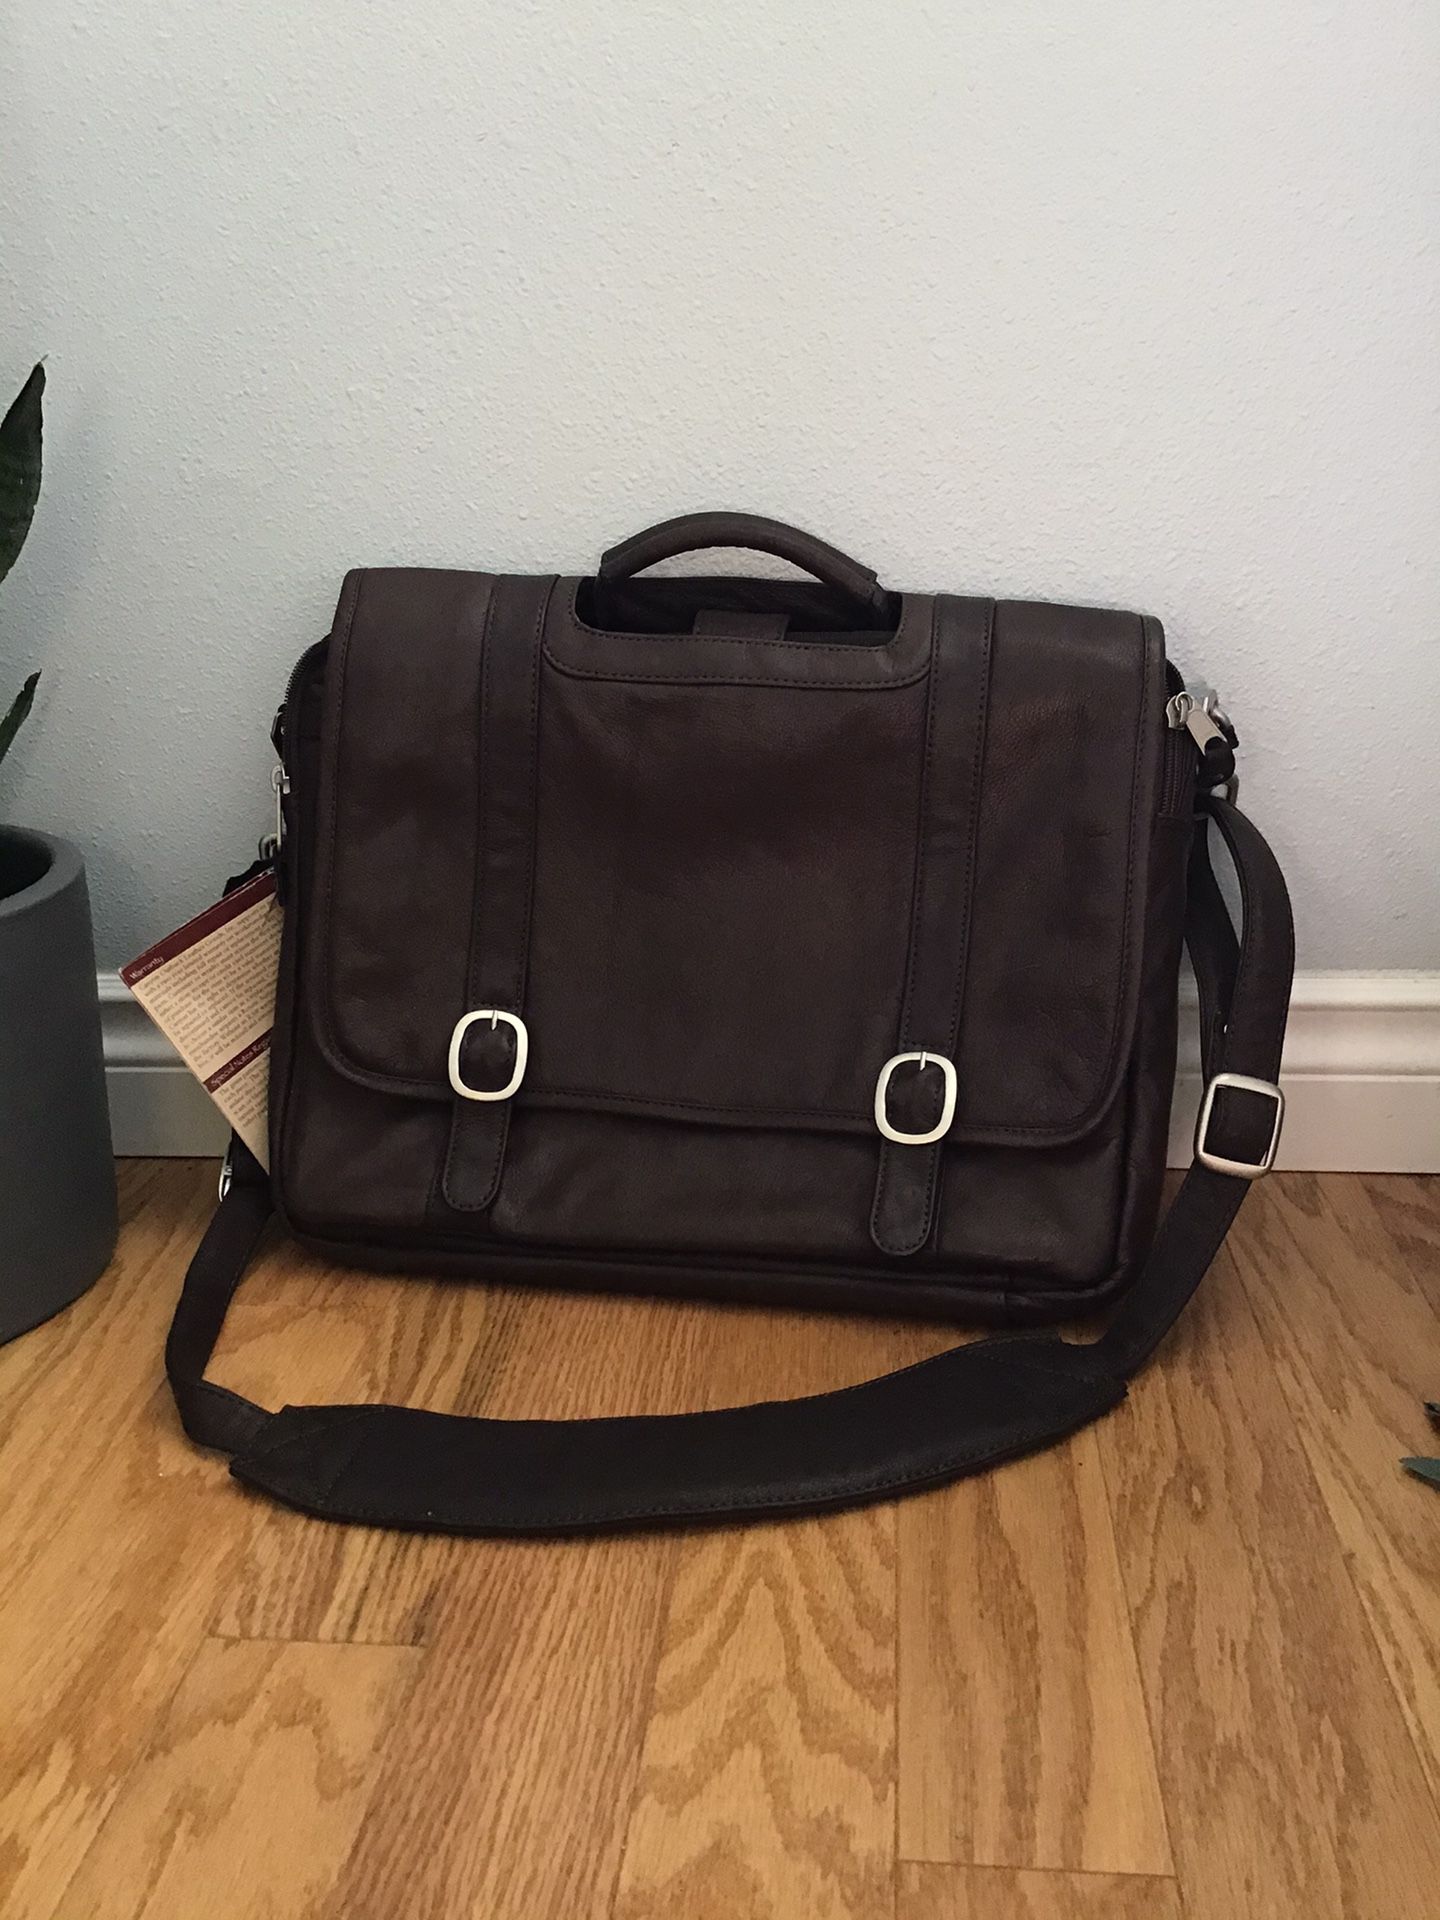 Canyon Leather Goods Messenger Briefcase Bag